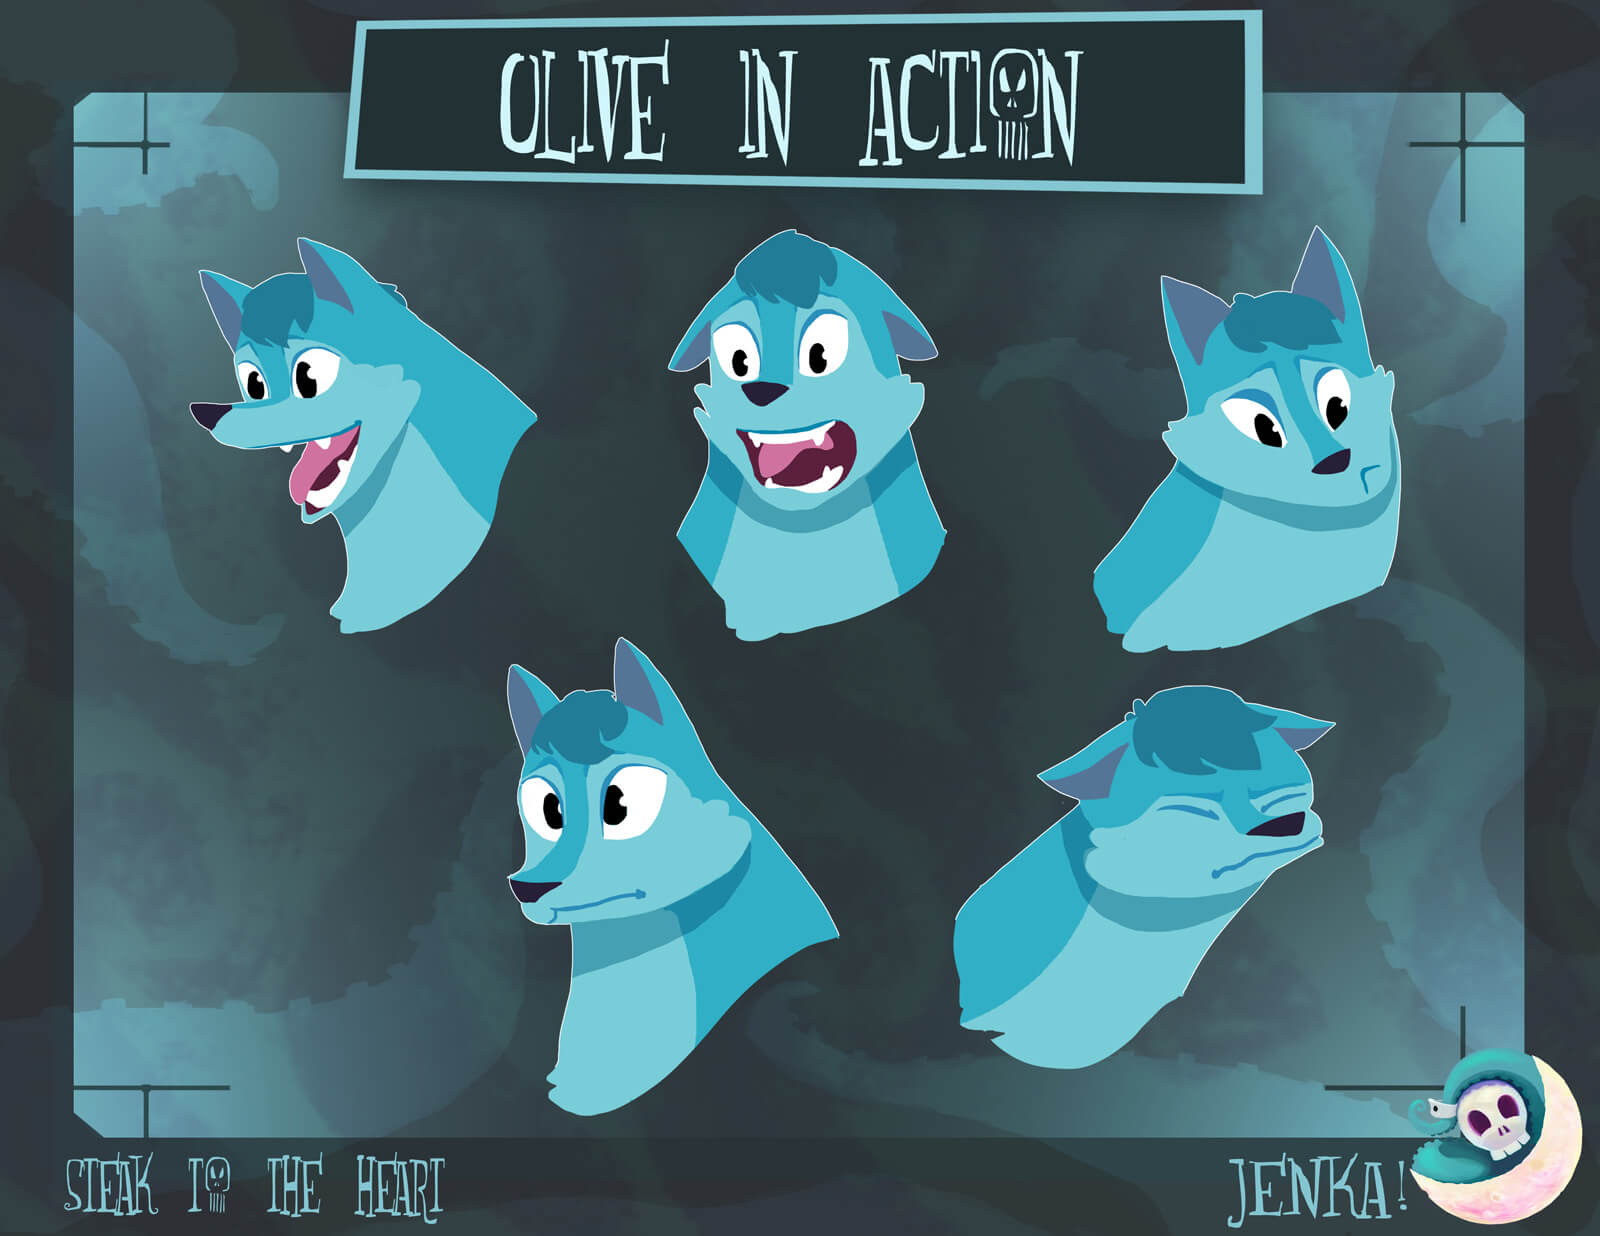 Facial expressions of a blue werewolf, including excited, shocked, disappointed, and confused